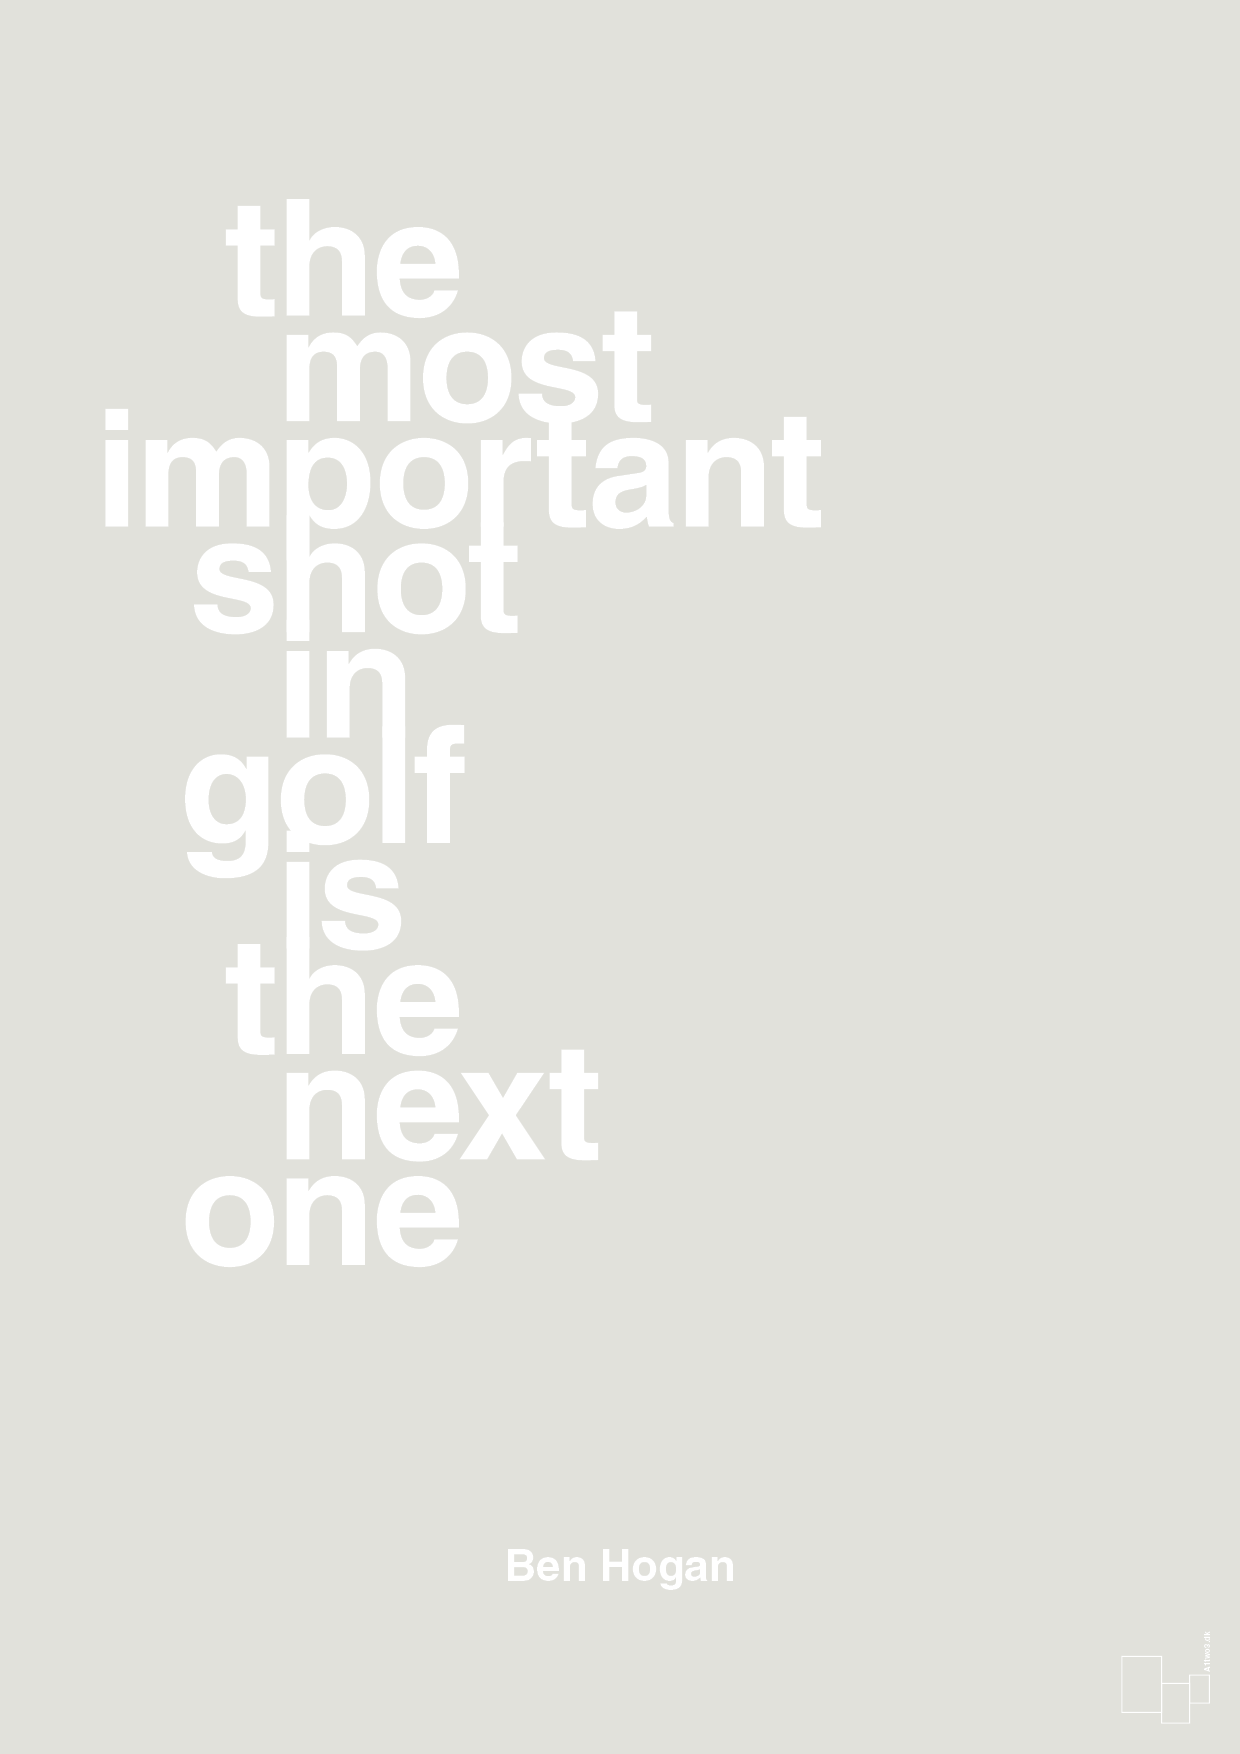 the most important shot in golf is the next one - Plakat med Citater i Painters White